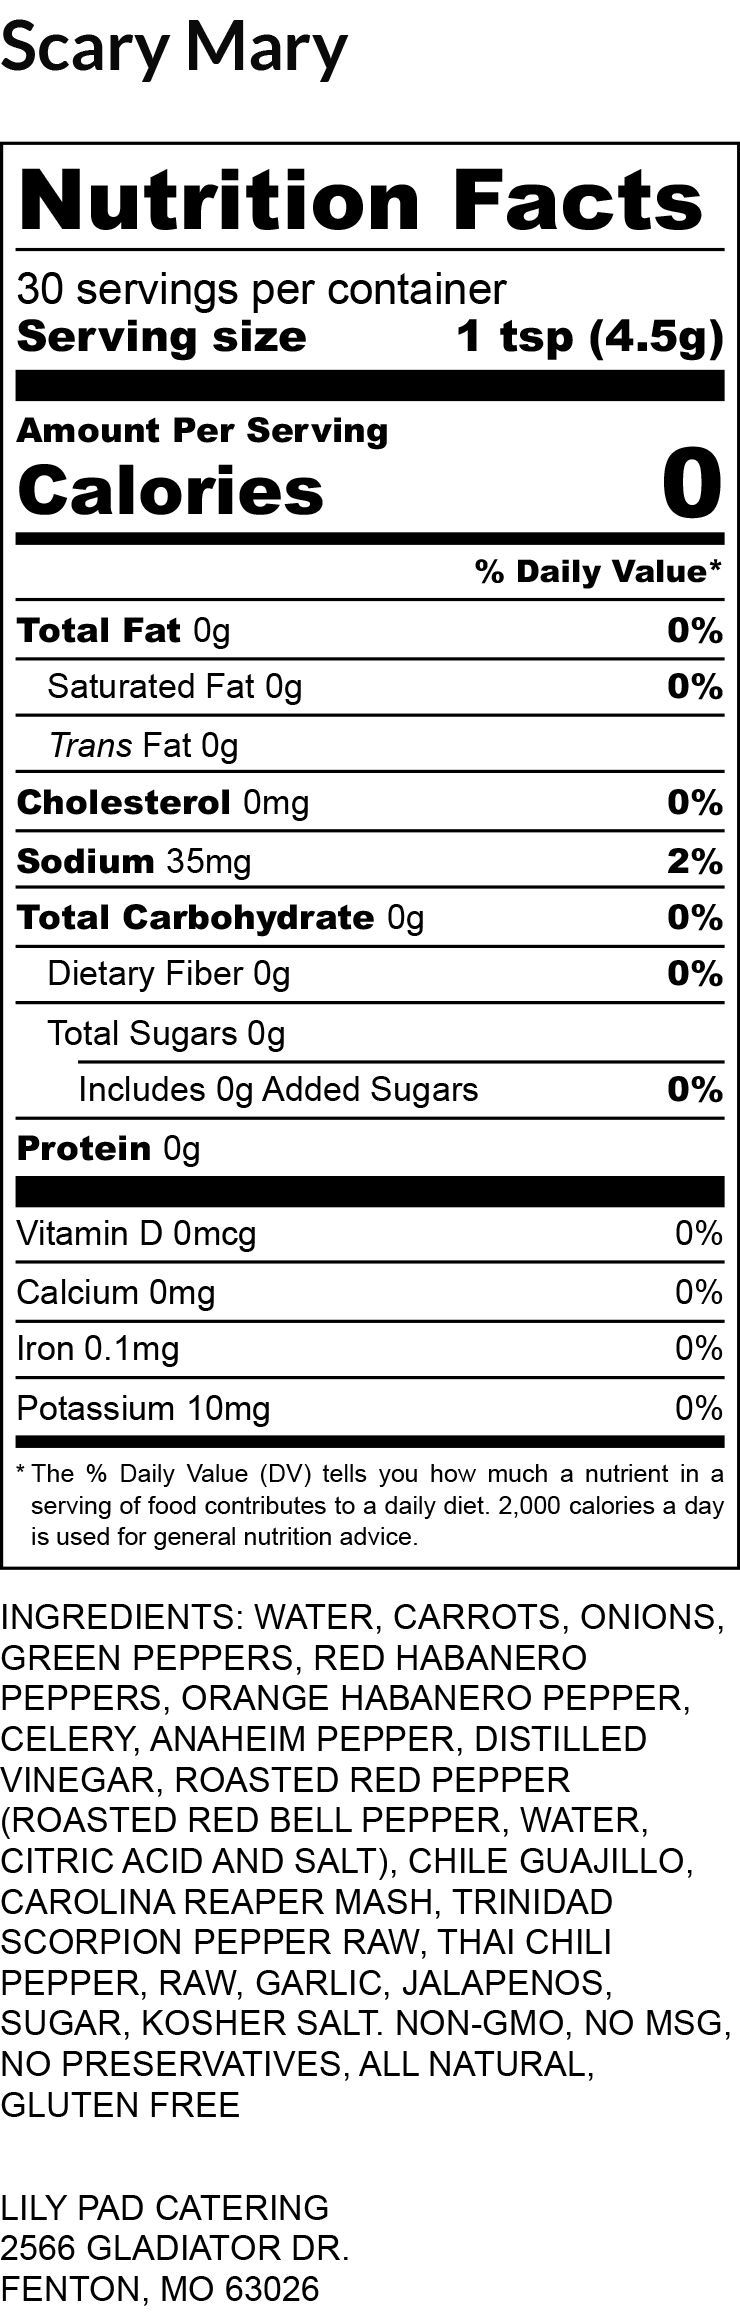 Scary Mary - Nutrition Label